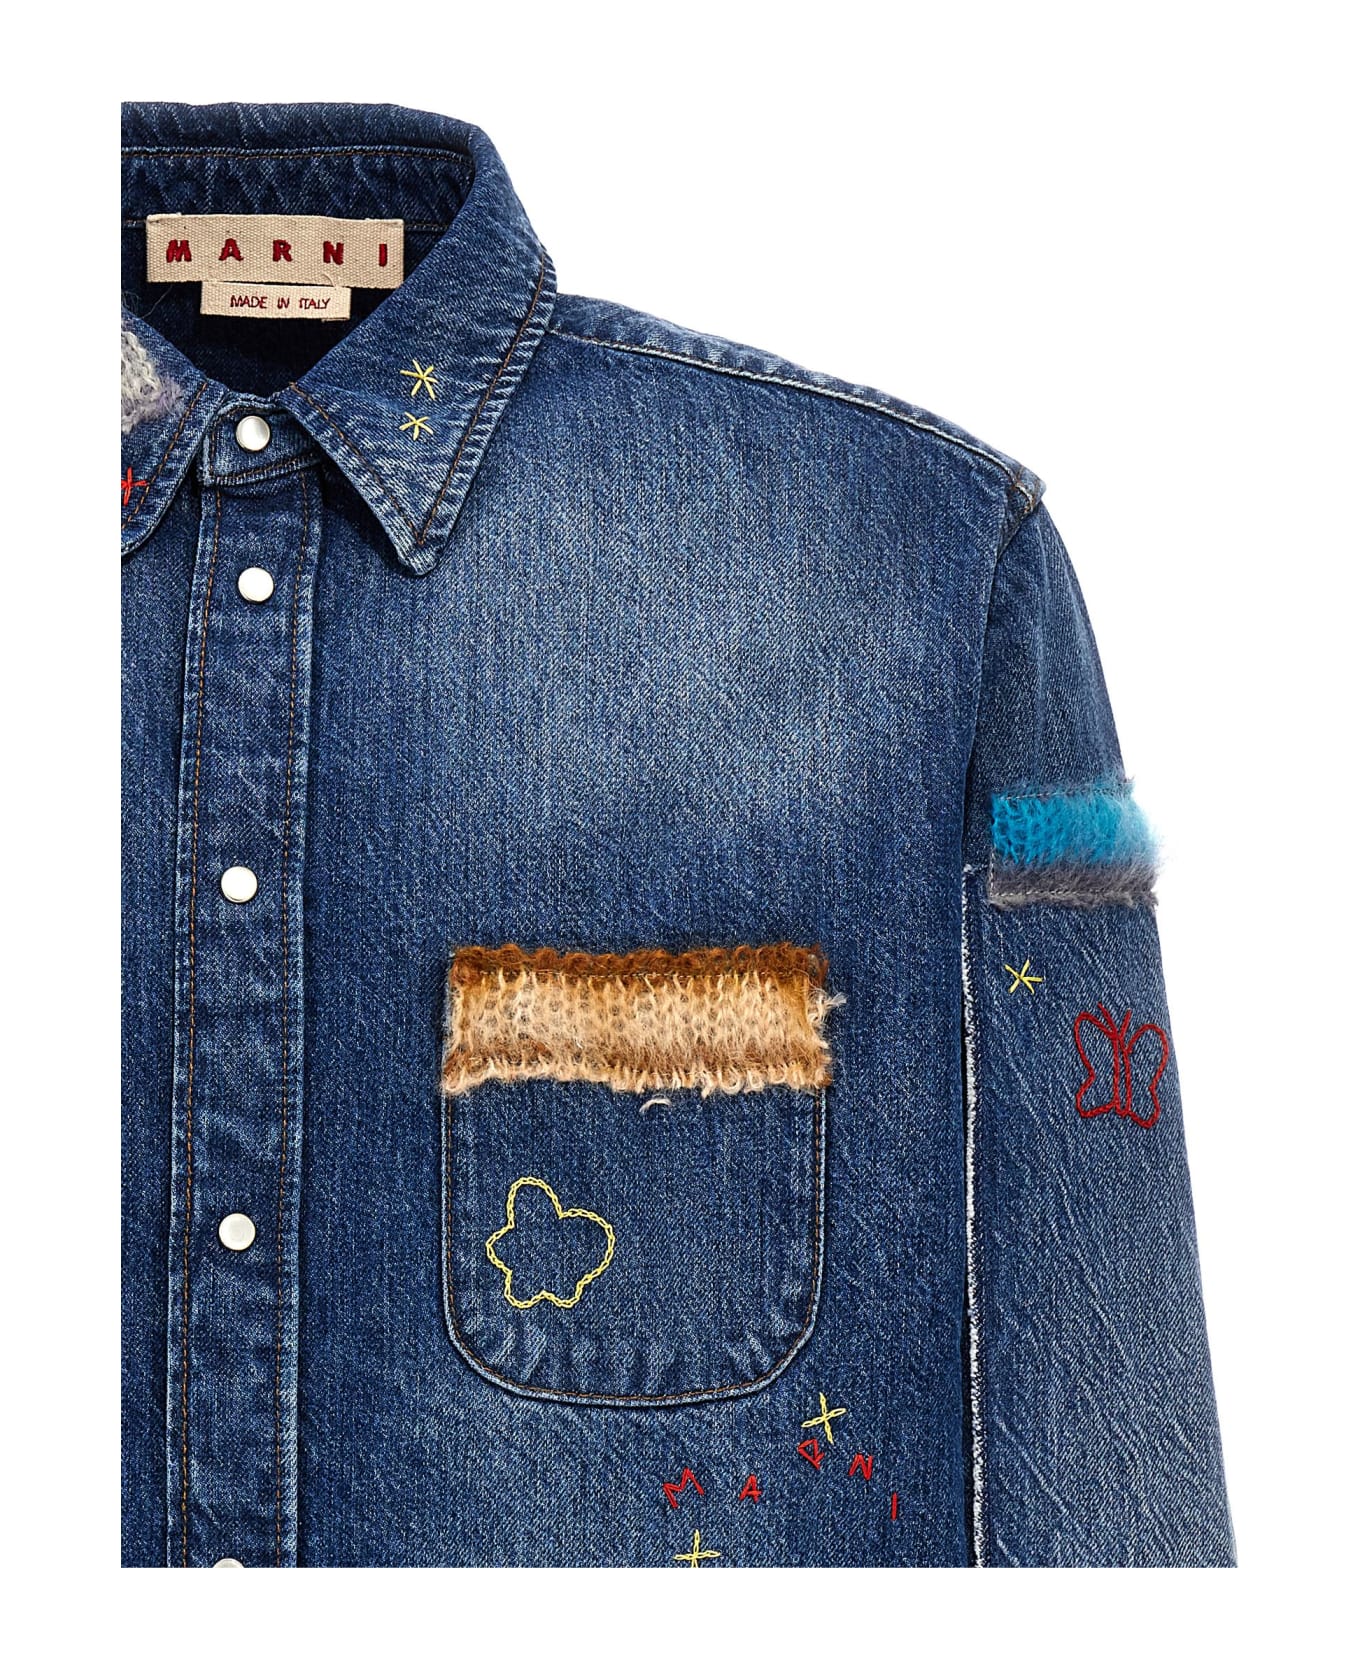 Marni Denim Shirt, Embroidery And Patches - Blue